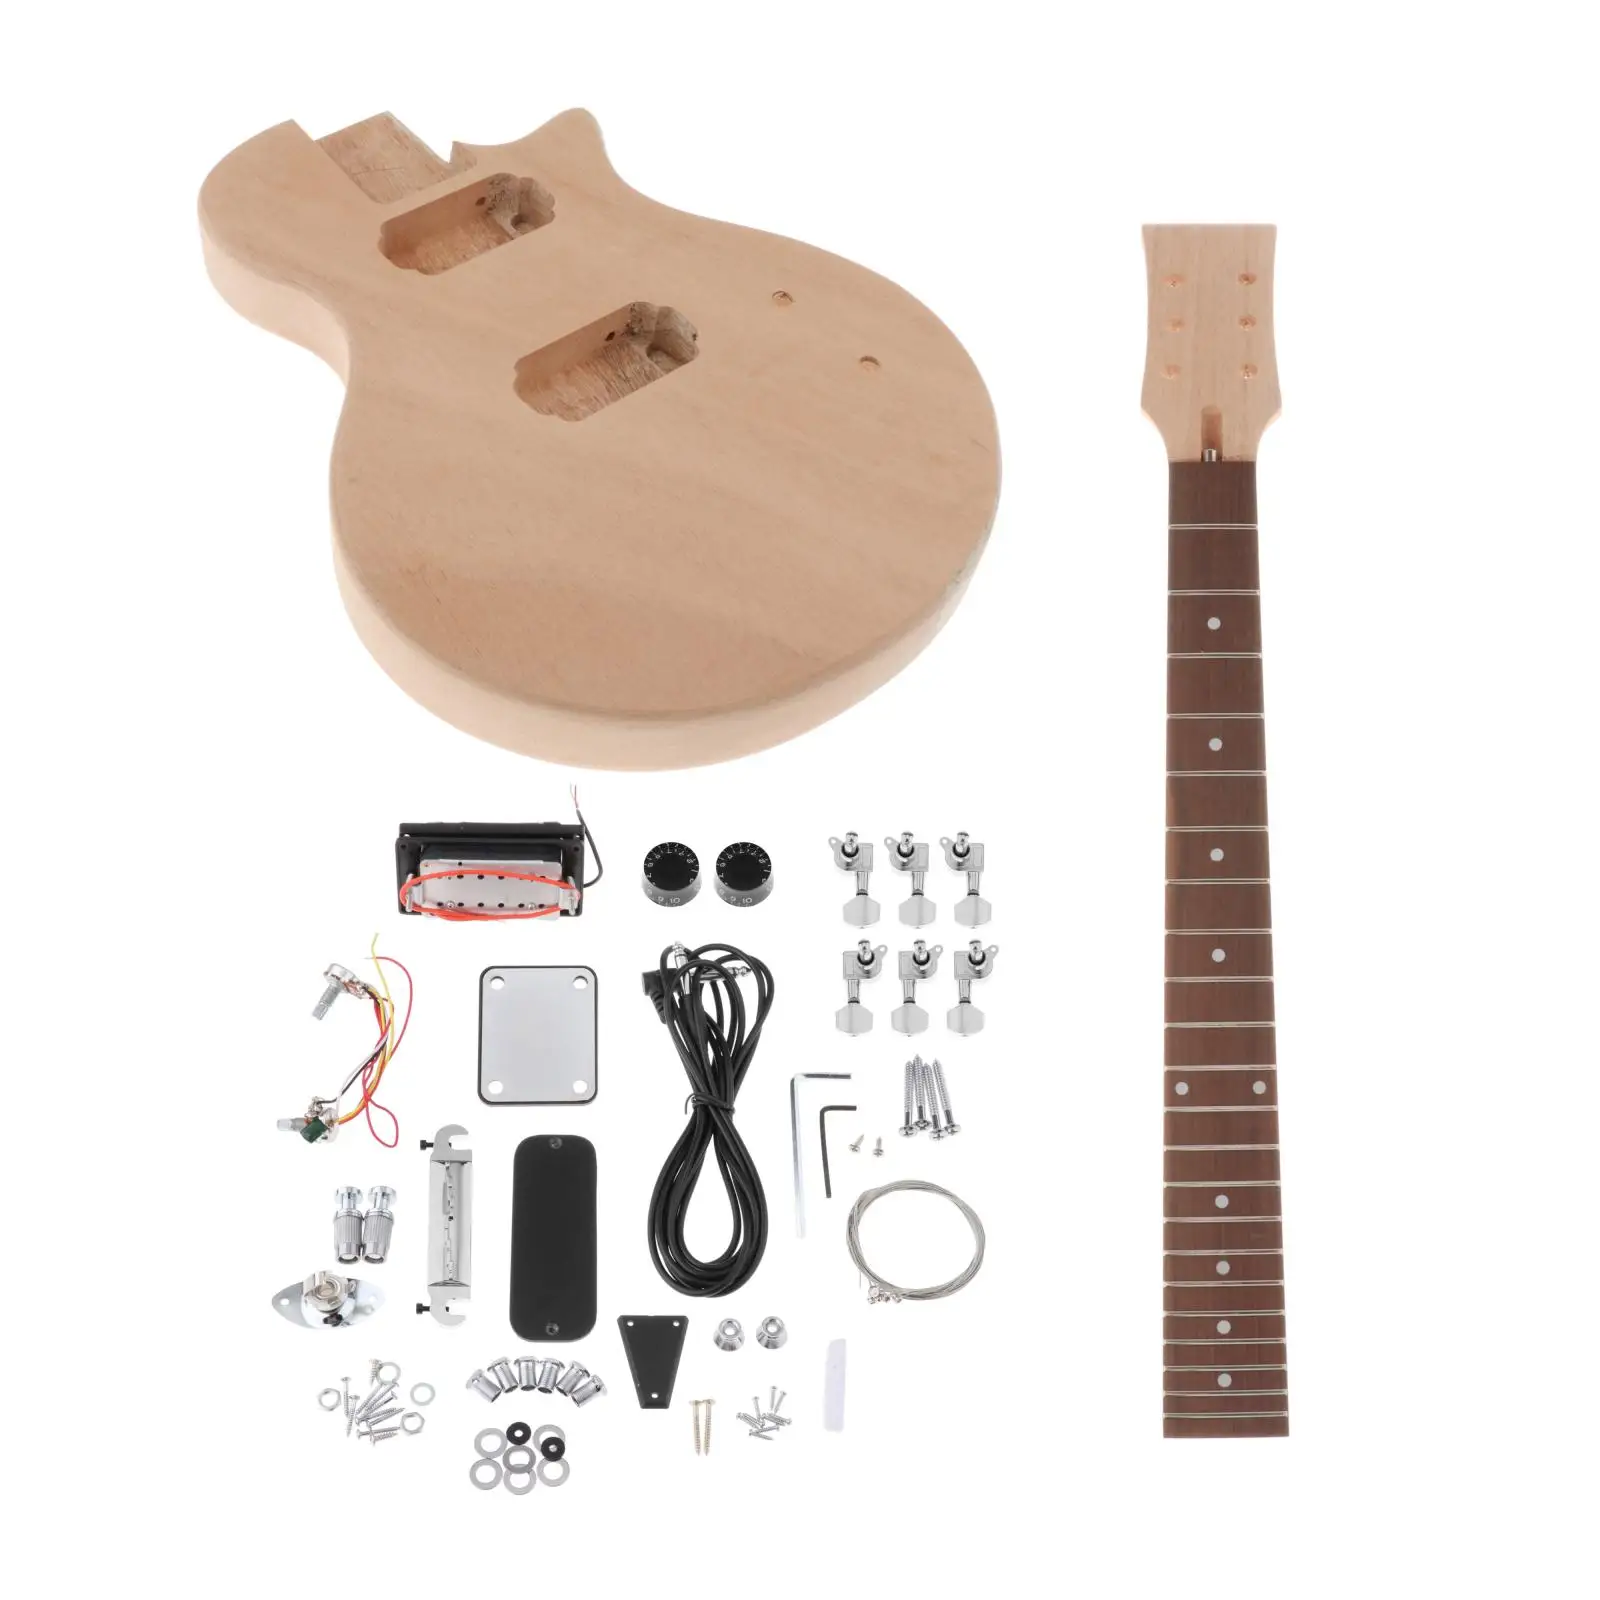 Abarich Unfinished Electric Guitar DIY Kit Set Mahogany Body & Neck Rose Wood Fingerboard 